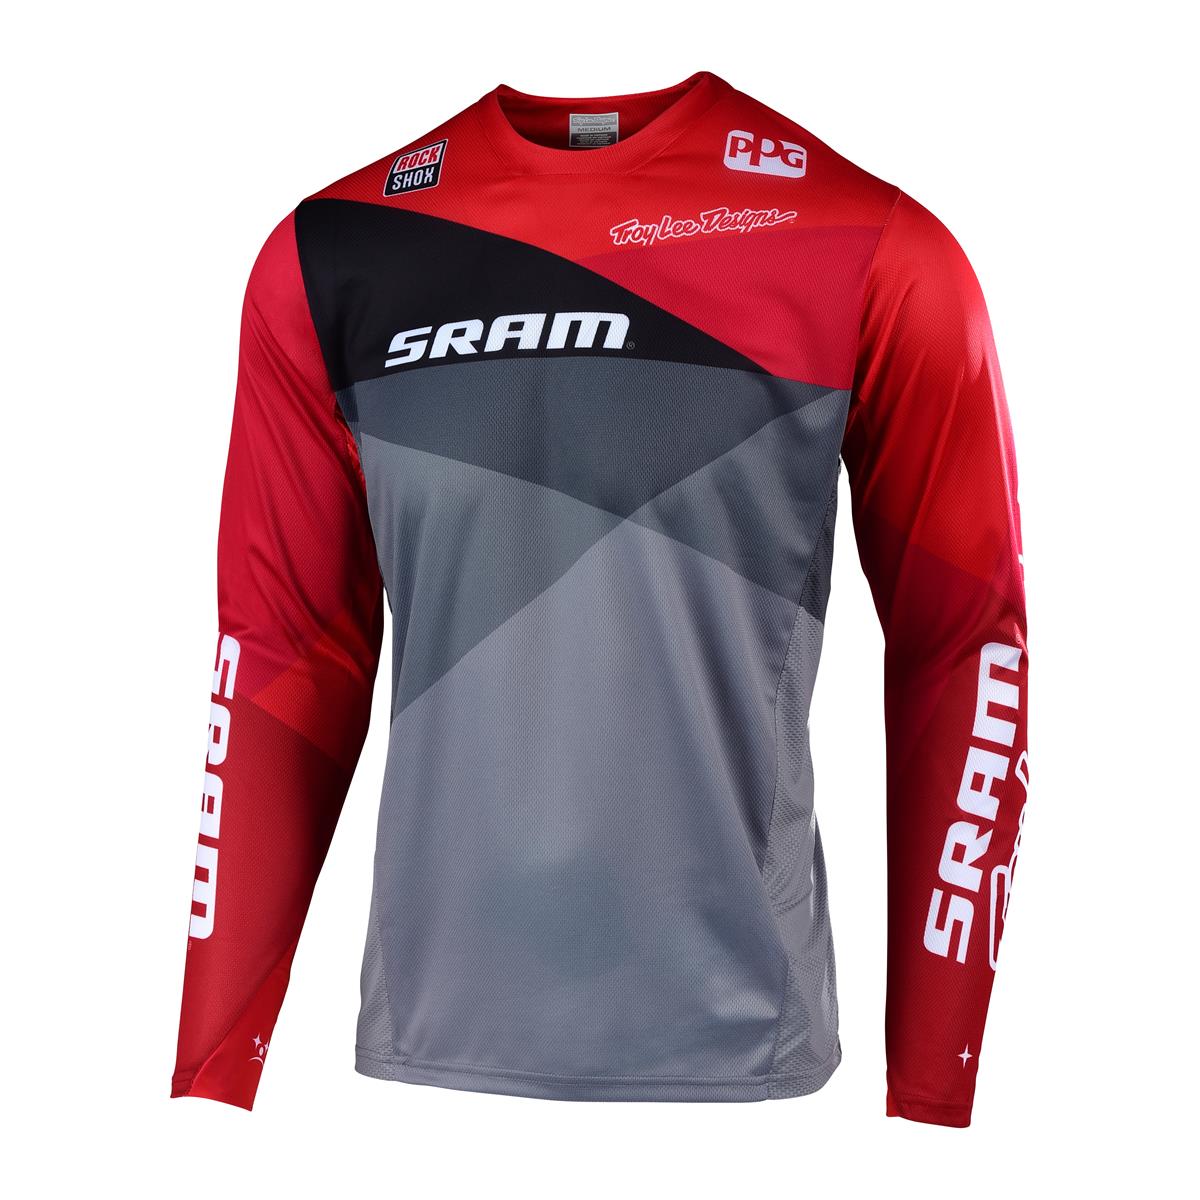 Troy Lee Designs Maillot VTT Manches Longues Sprint SRAM Jet - Grey/Red